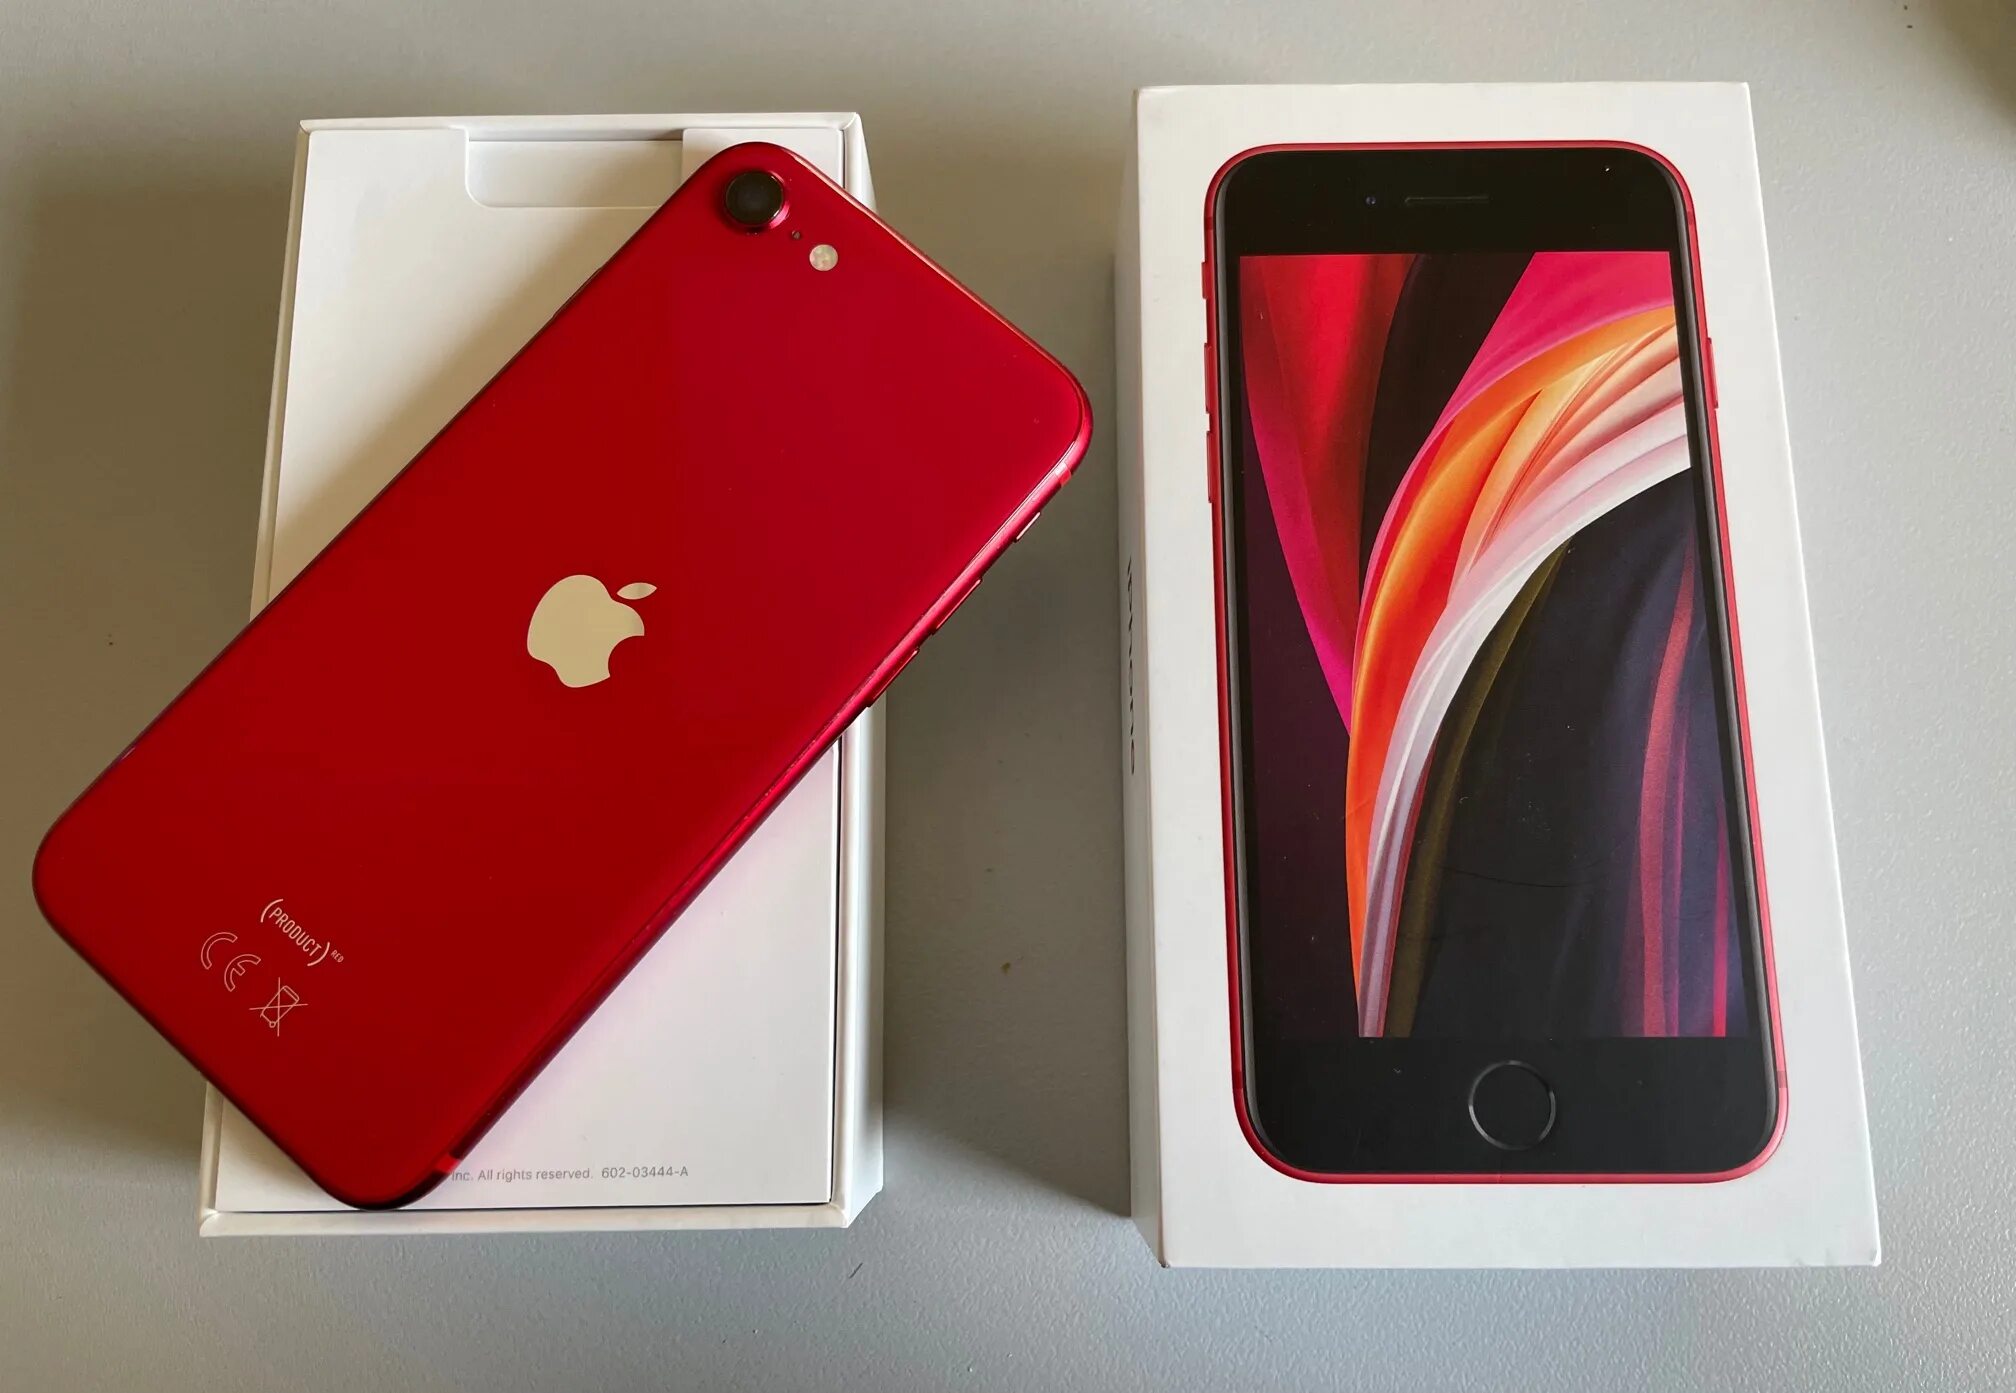 Айфон се 2020 64. Iphone se (2020) 64gb (product) Red. Iphone se (2020) 64gb Red. Iphone se 2020 Red. Apple iphone se(2020) product Red 64gb.